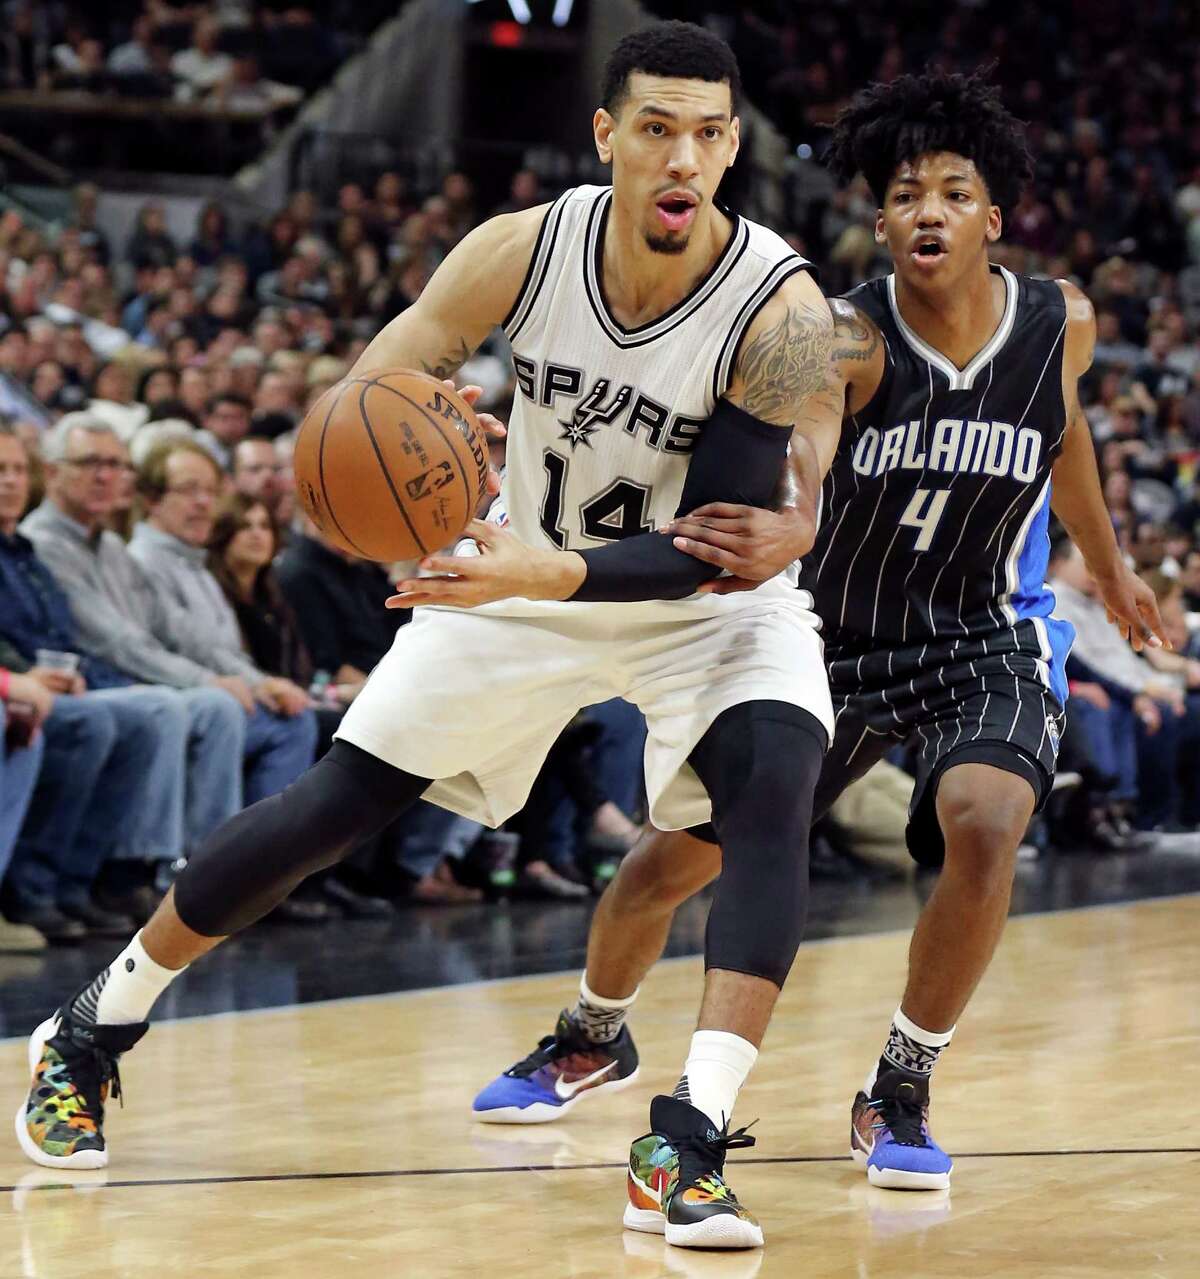 San Antonio Spurs' Danny Green looks for room around Orlando Magic's Elfrid Payton during second half action Monday Feb. 1, 2016 at the AT&T Center. The Spurs won 107-92.